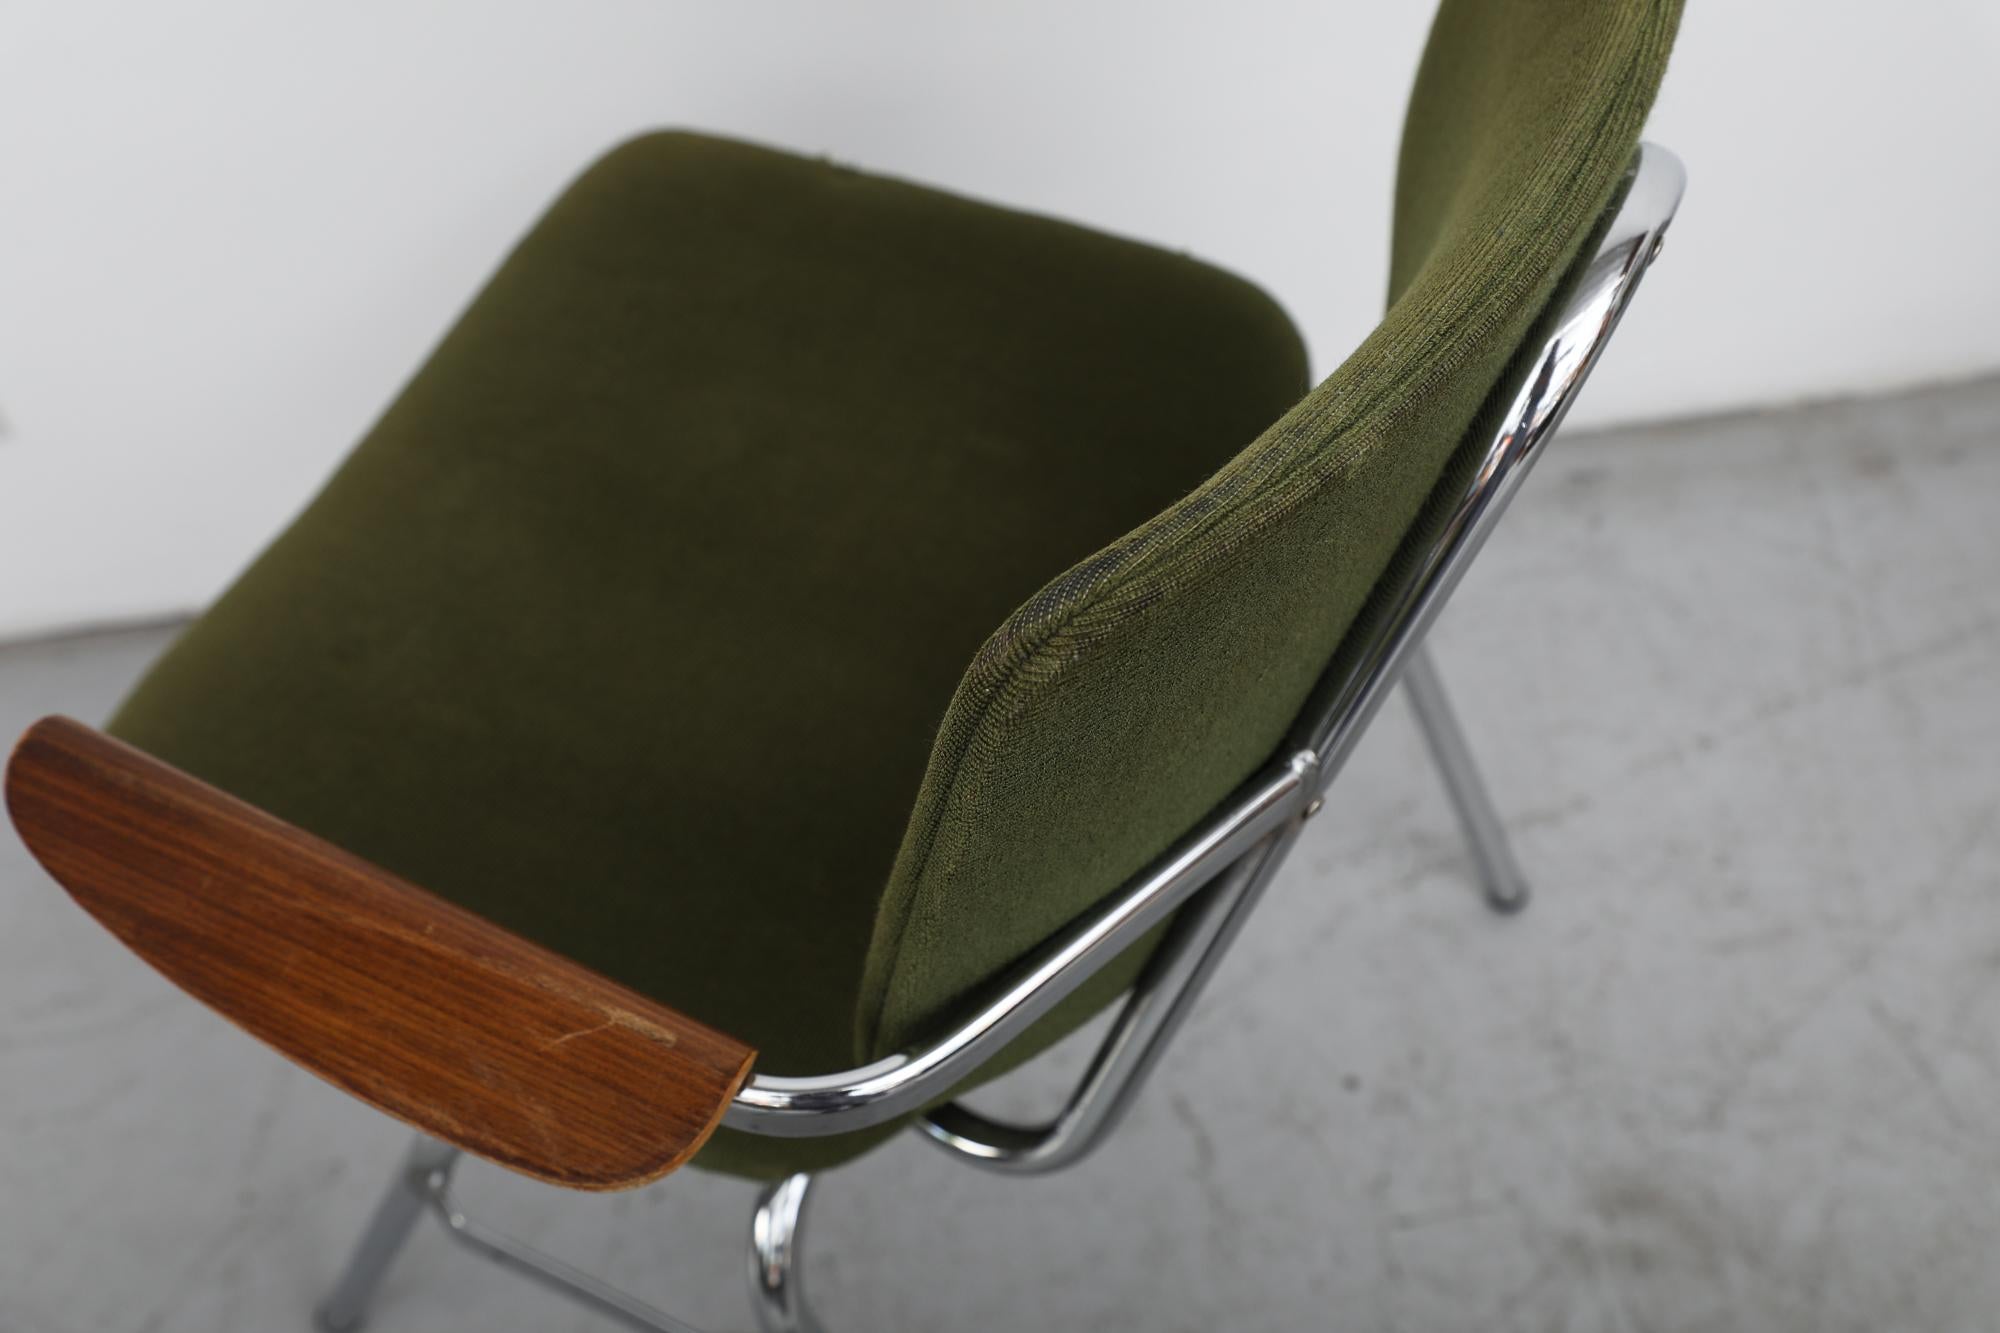 Kho Liang Ie 'Model 395 B/Z' Green Stacking Chairs with Armrests (Chaises empilables vertes avec accoudoirs) en vente 4